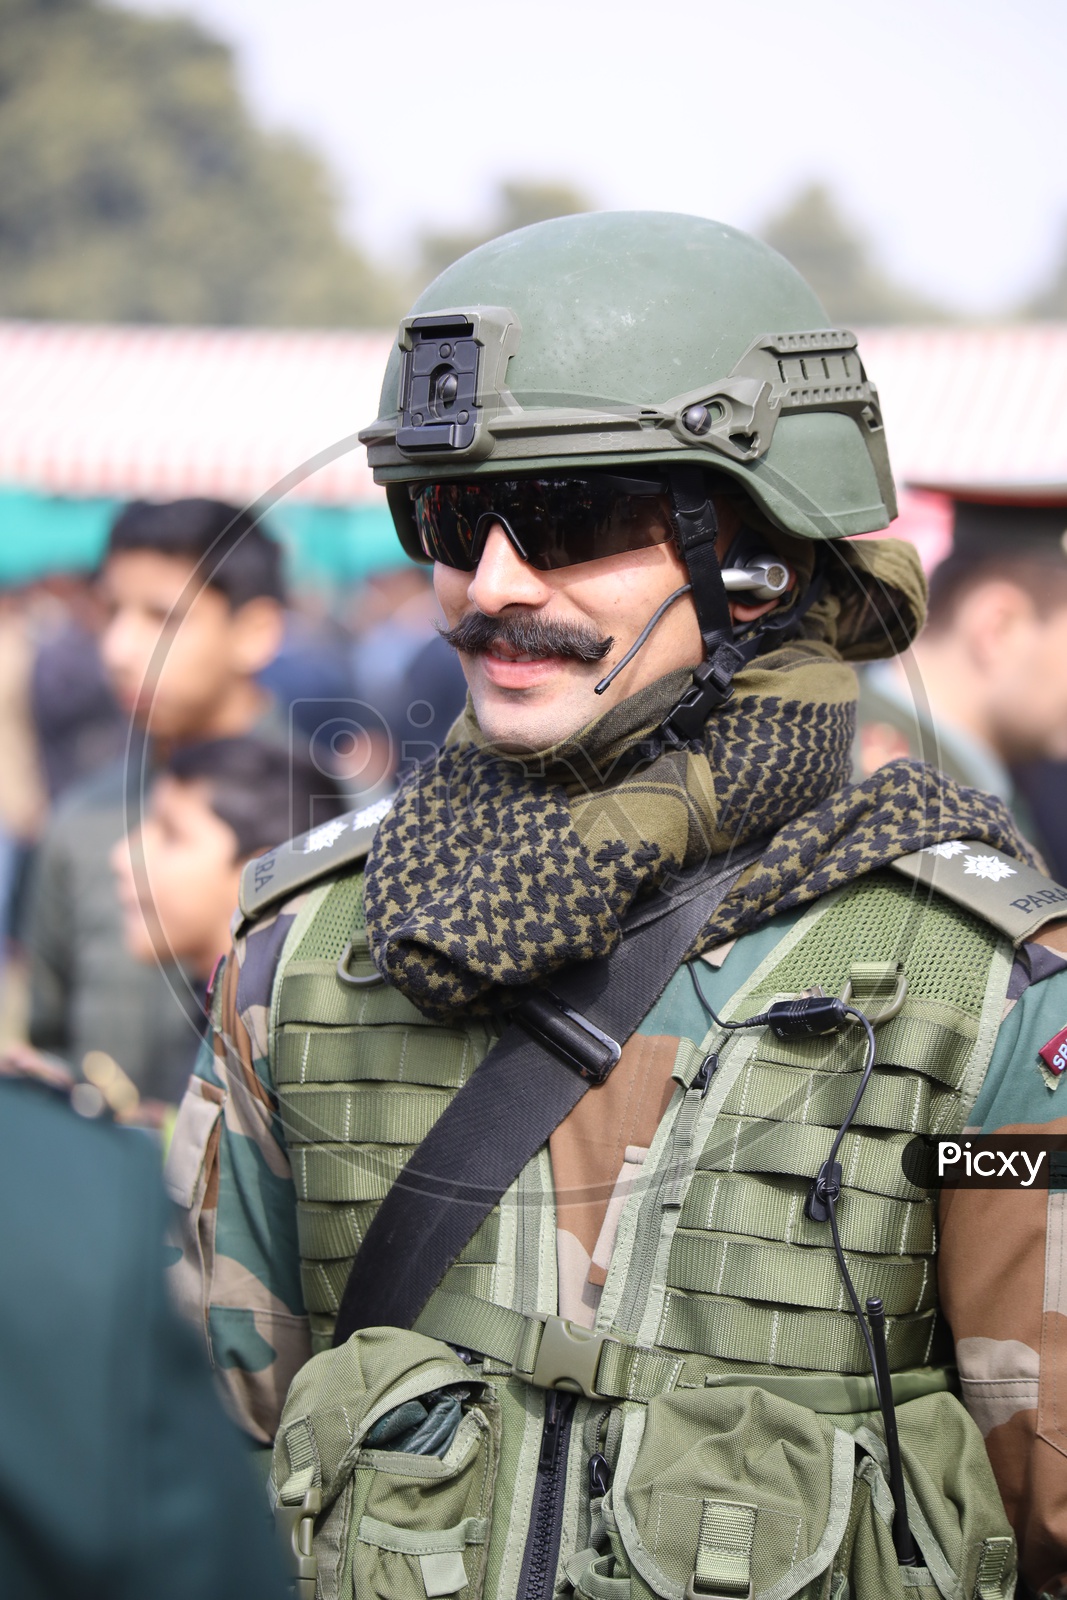 What is the difference in the colour of stars in Para SF/ Para Regt.  officer's uniform (black star & white star)? - Quora